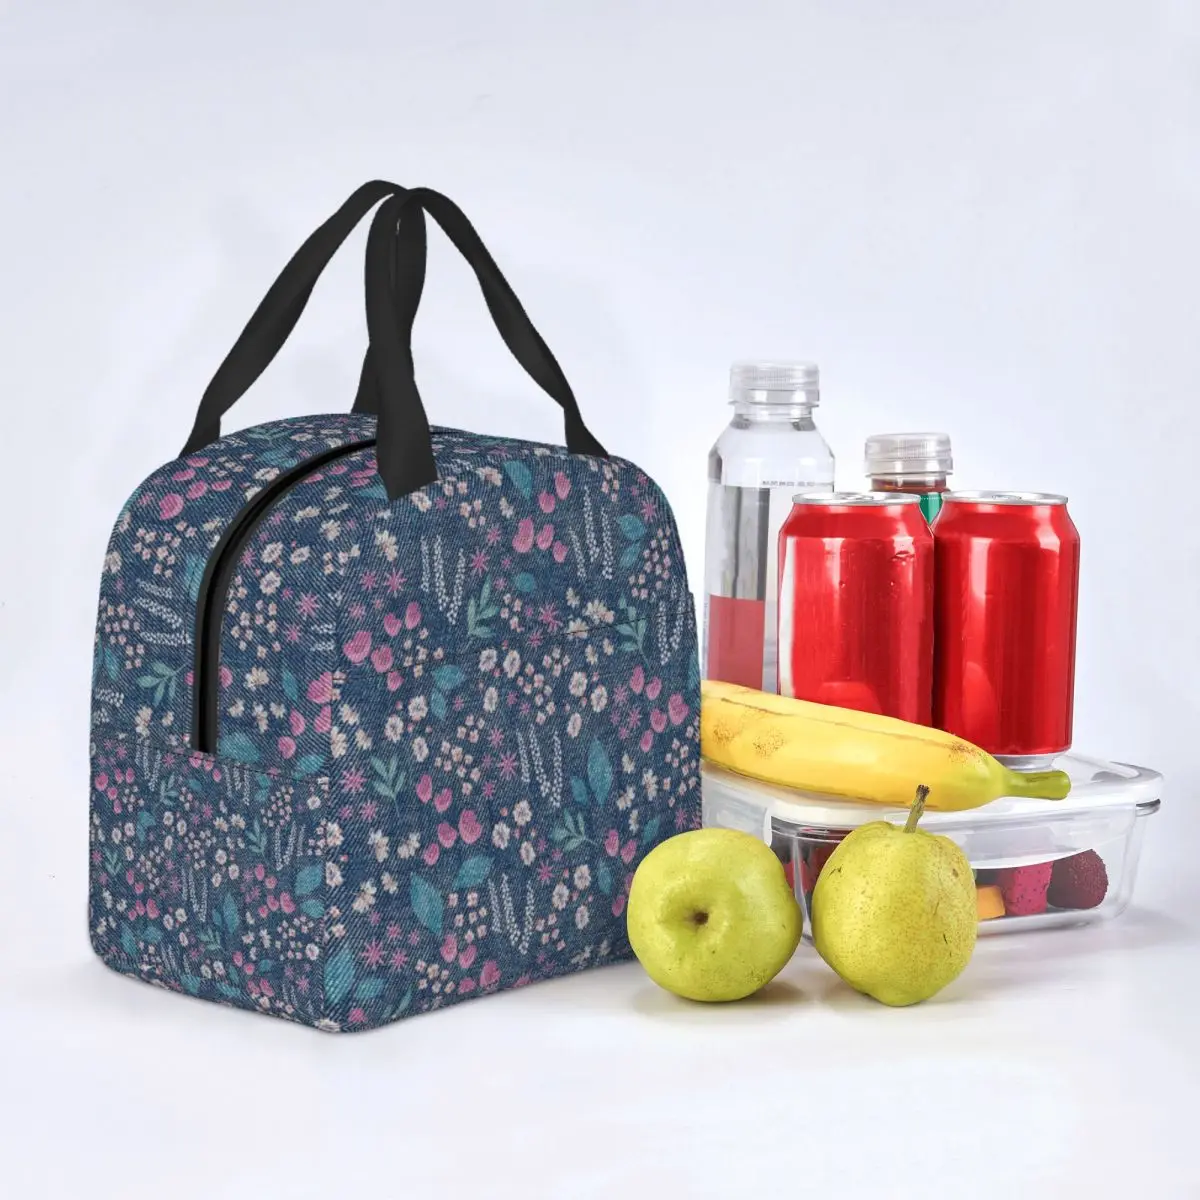 Denim Textures With Flower Pattern Lunch Bags Portable Insulated Oxford Cooler Thermal Cold Food Picnic Lunch Box for Women Girl